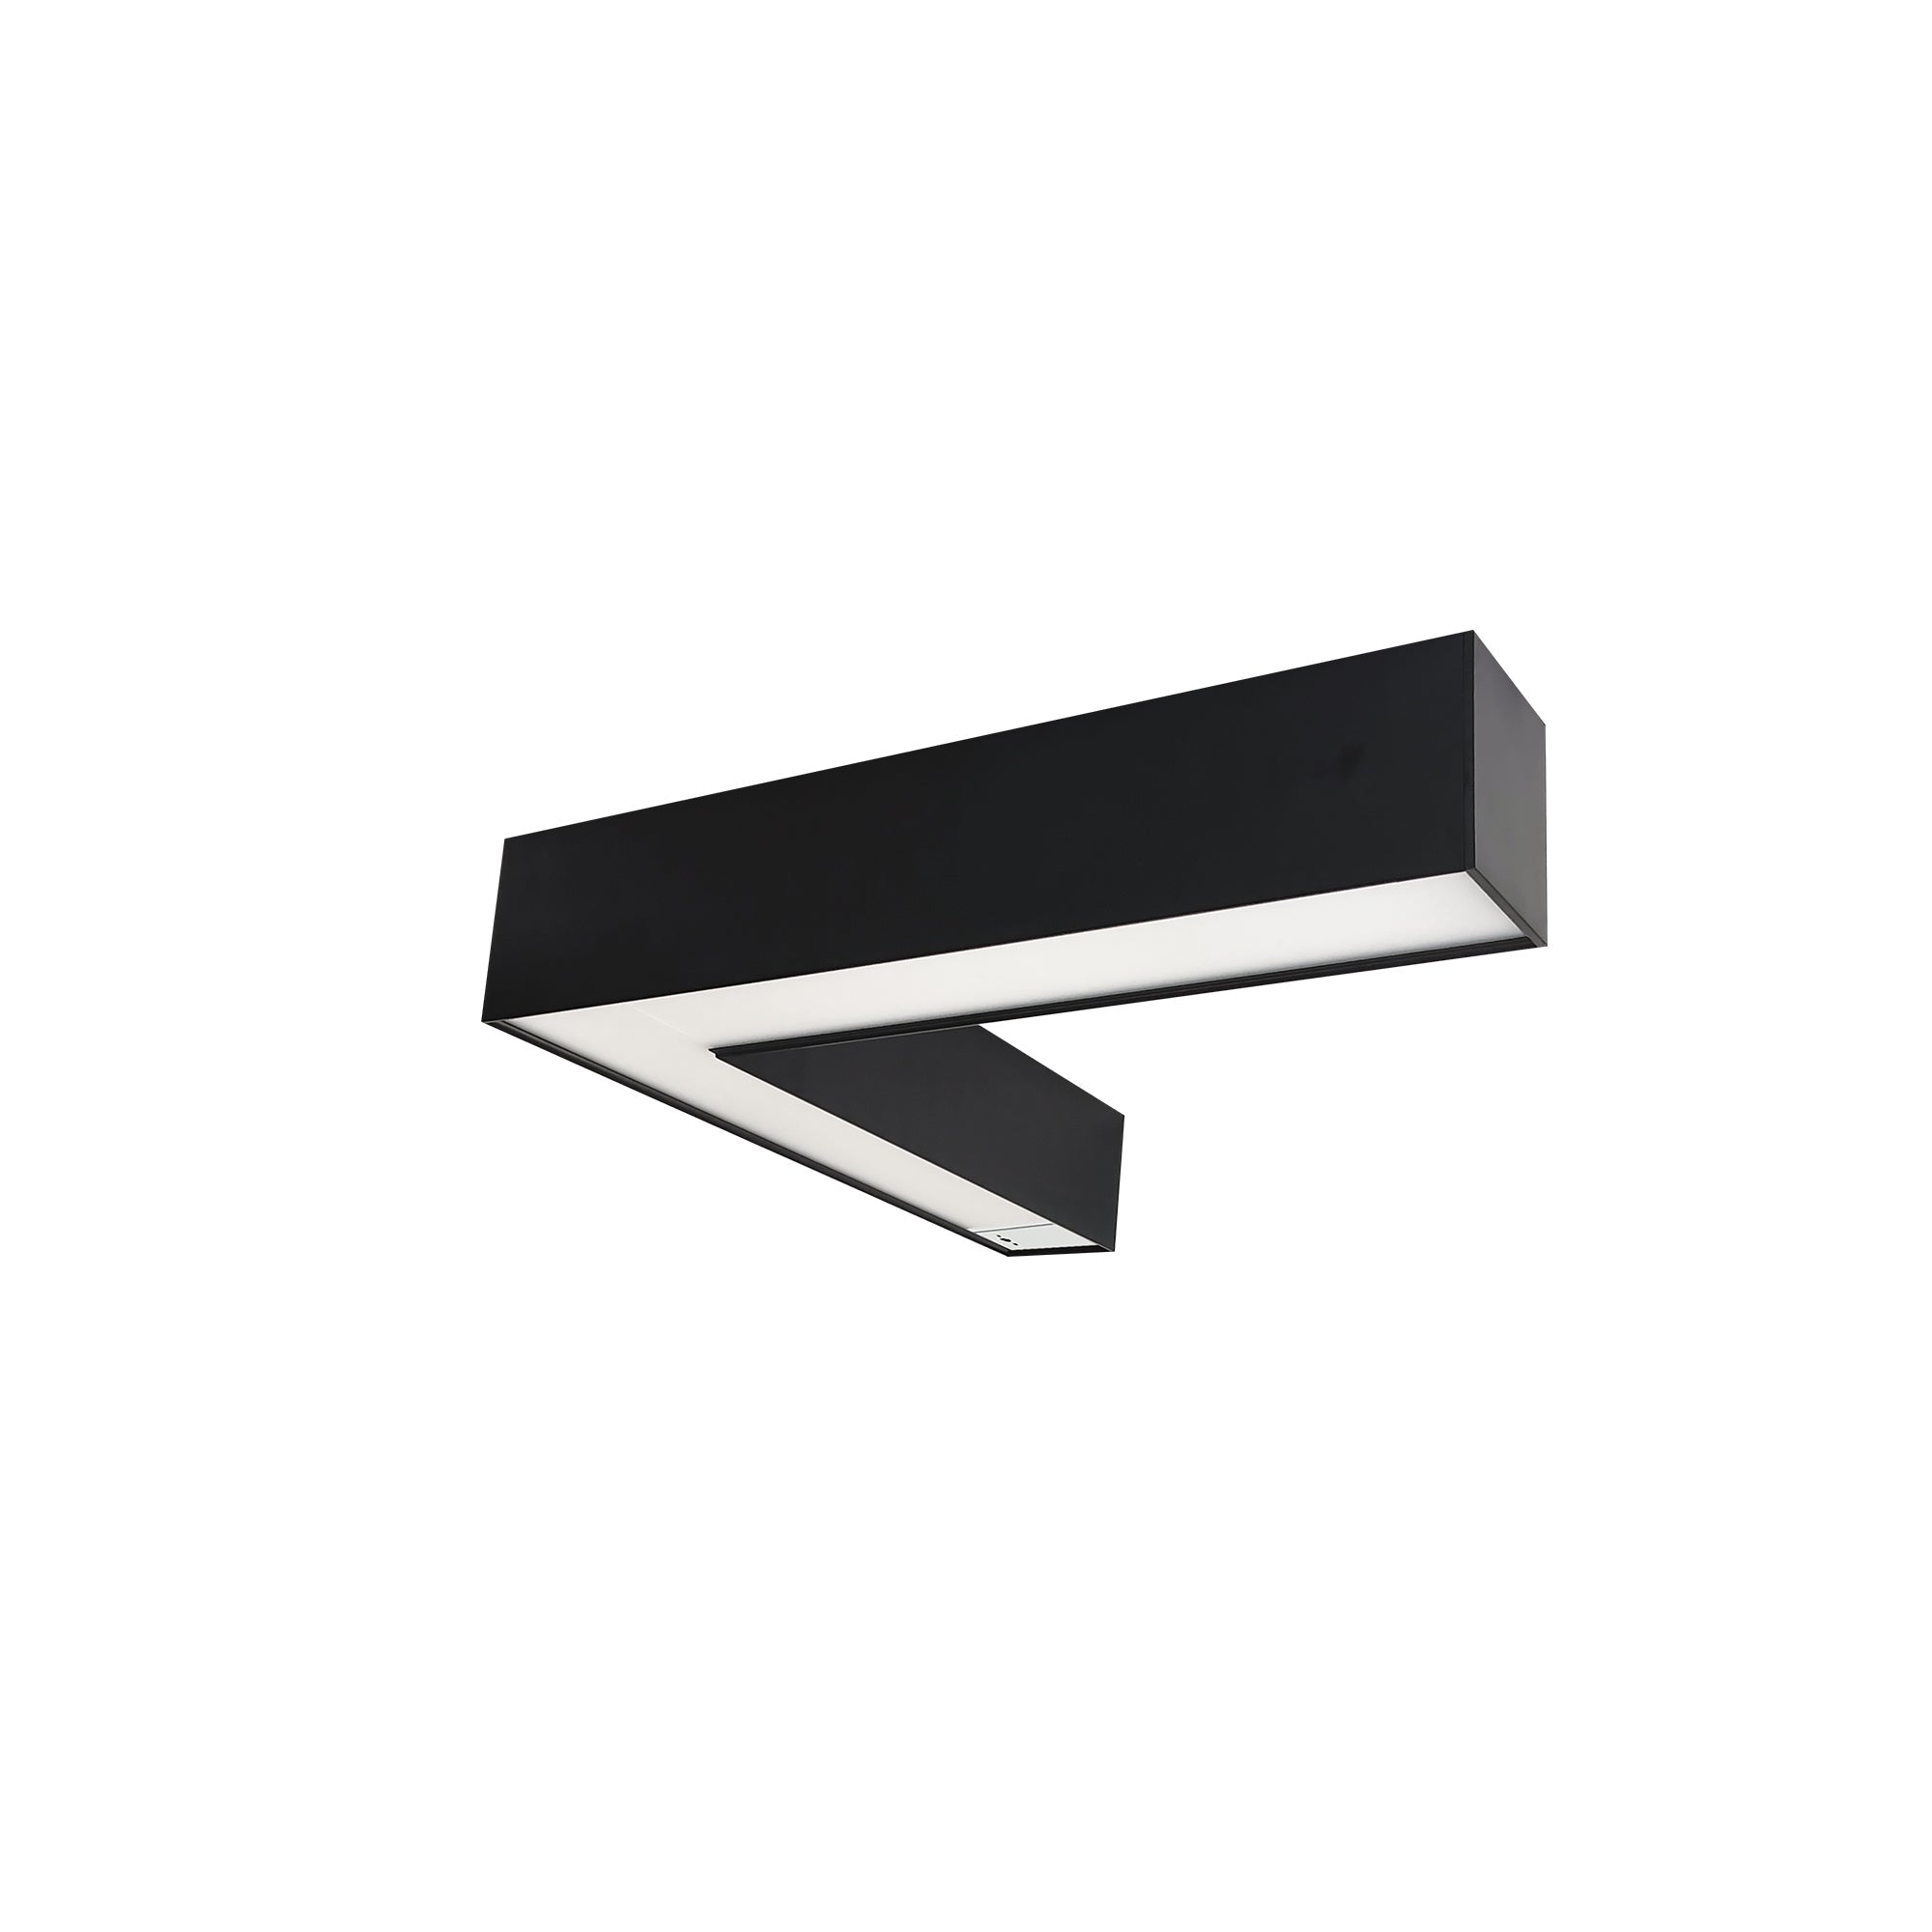 Nora Lighting NLUD-L334B/OS - Linear -  InchL Inch Shaped L-Line LED Indirect/Direct Linear, 3781lm / Selectable CCT, Black Finish, with Motion Sensor